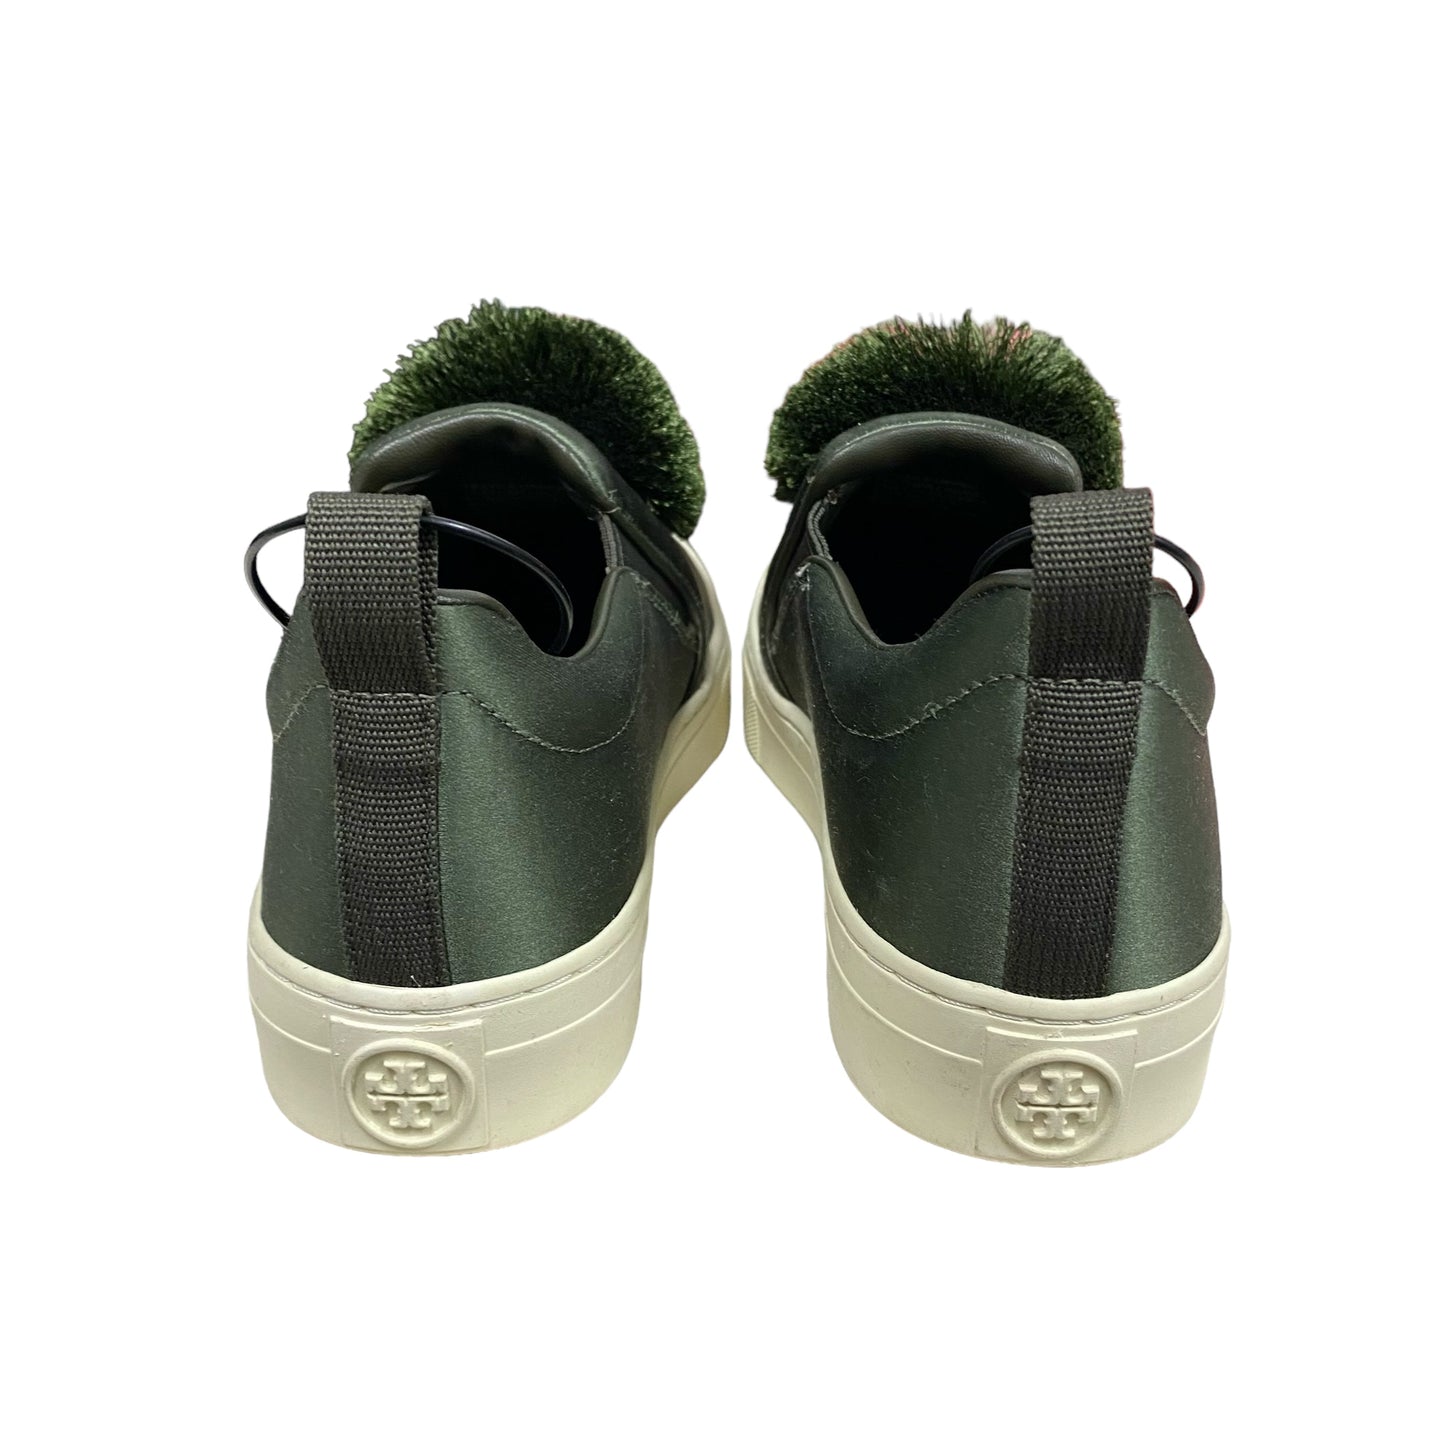 Green Shoes Designer Tory Burch, Size 6.5